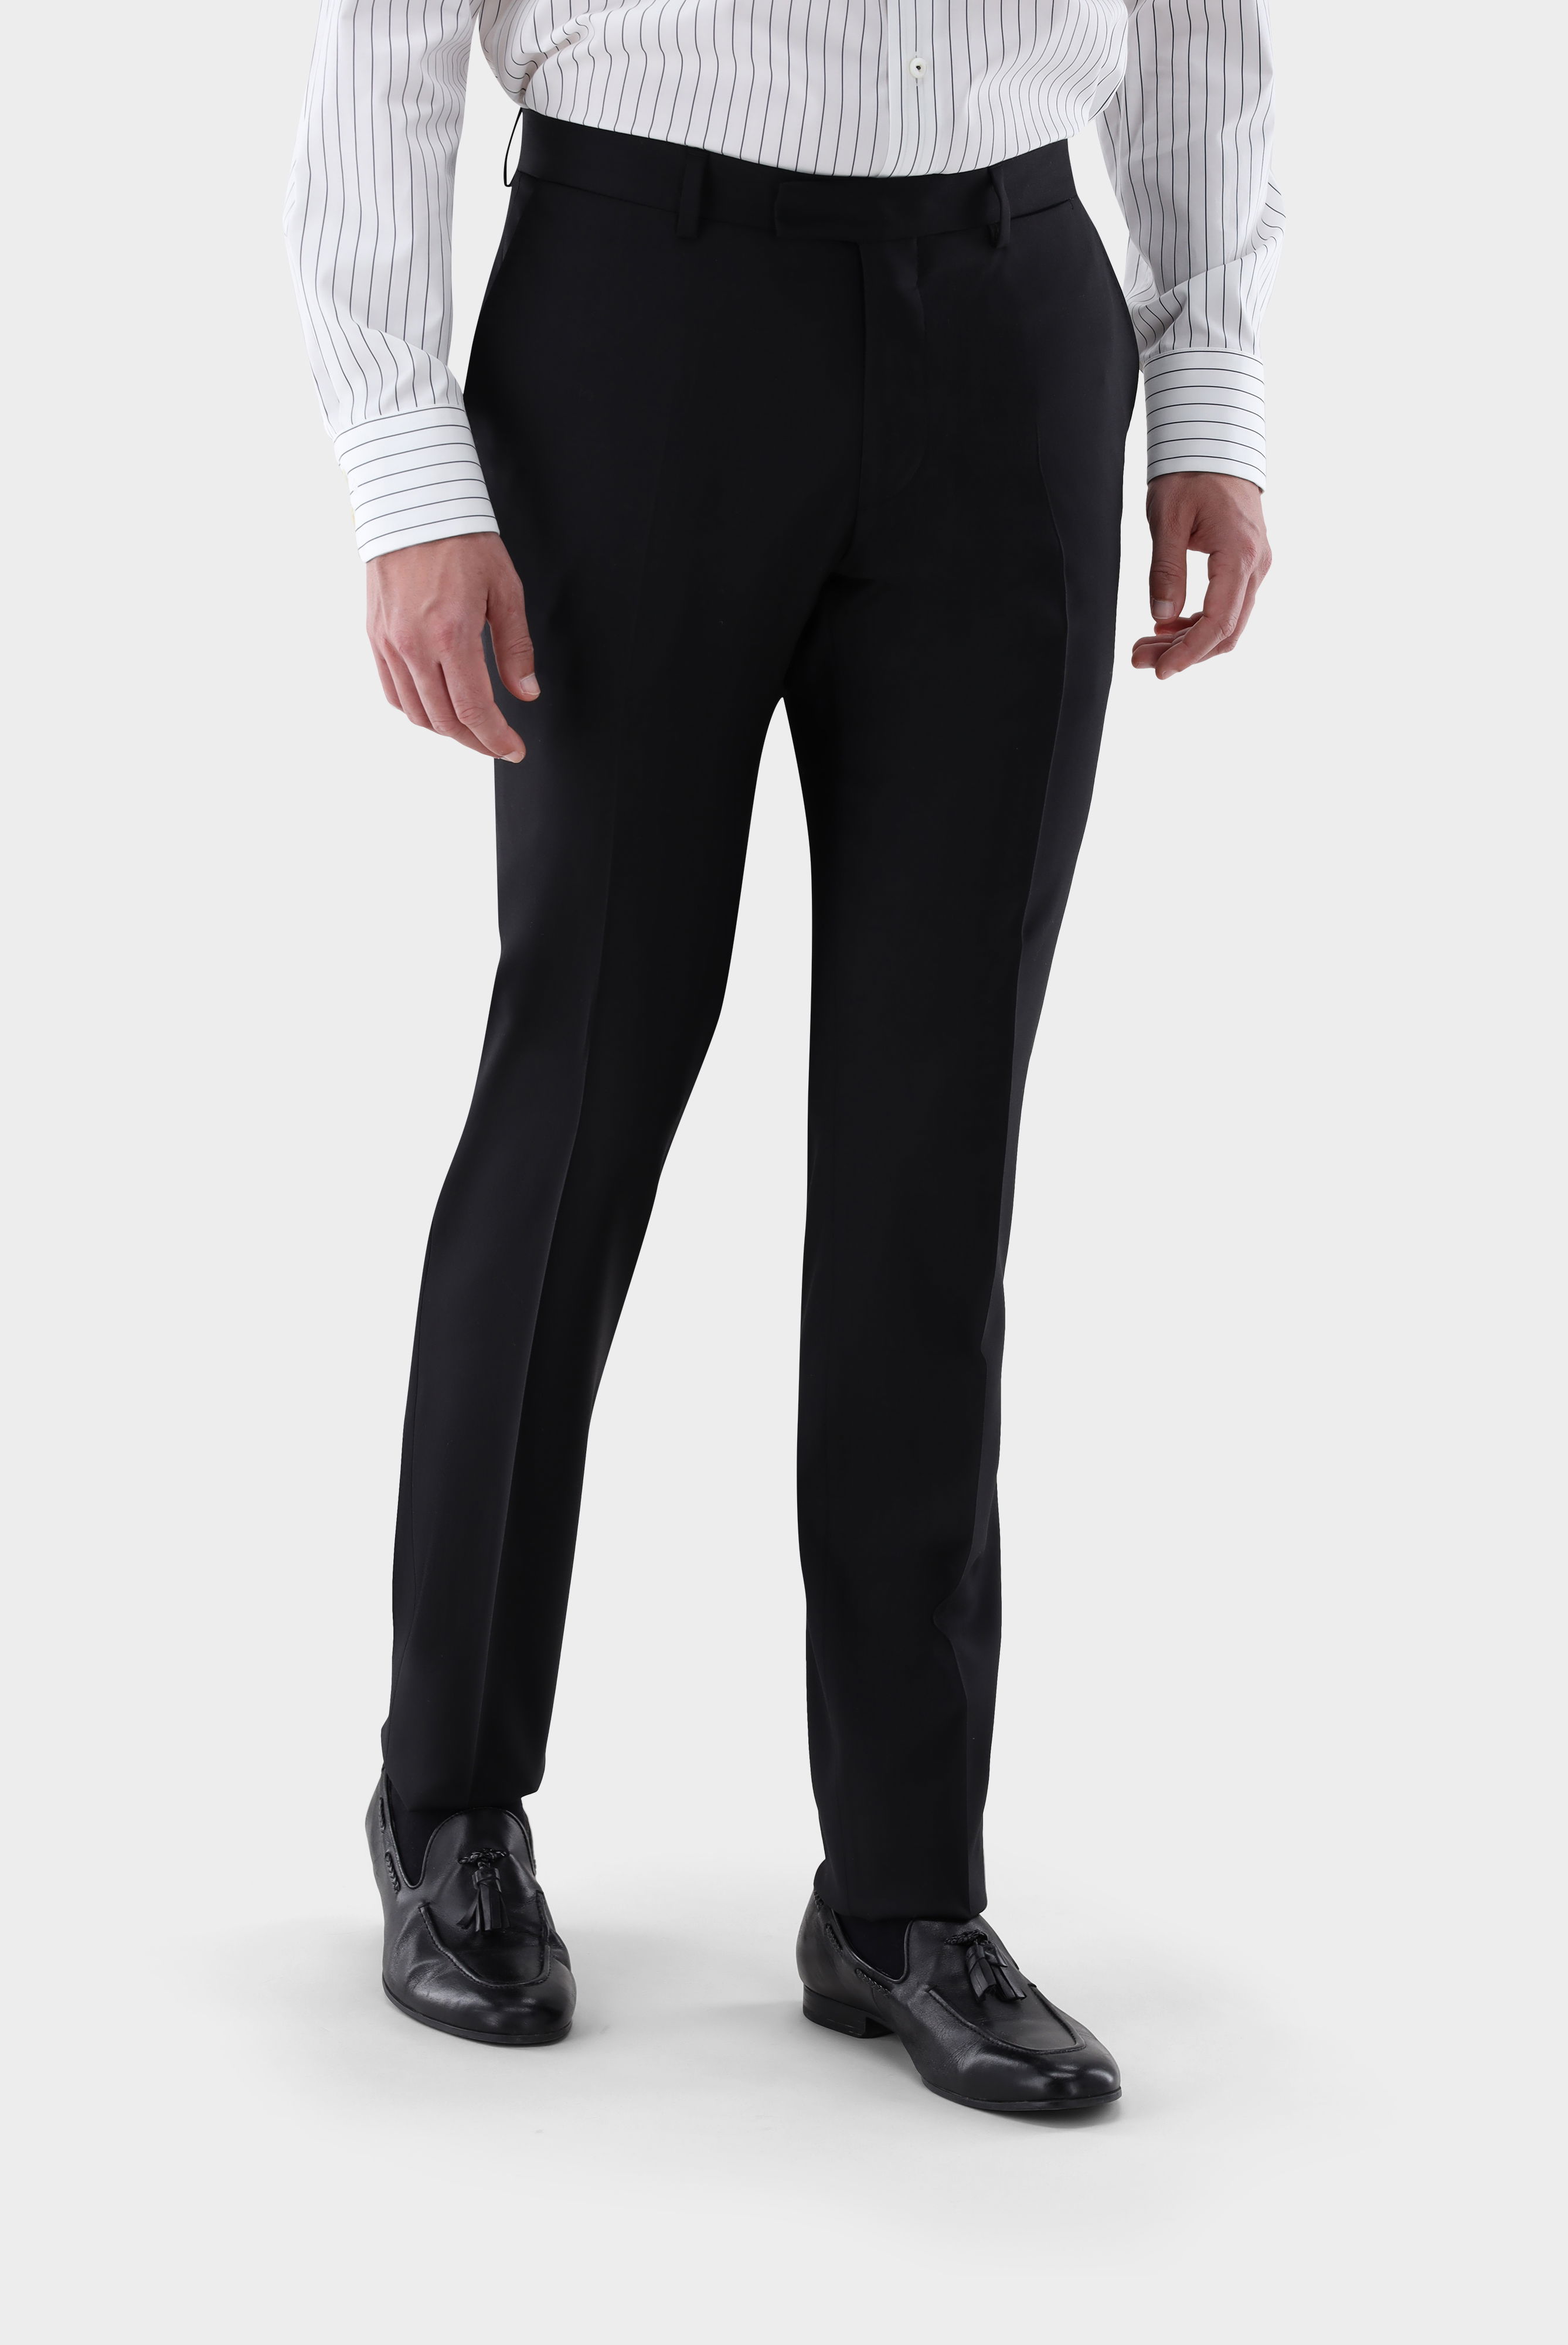 Jeans & Trousers+Wool Trousers Slim Fit+20.7880.16.H01010.099.52